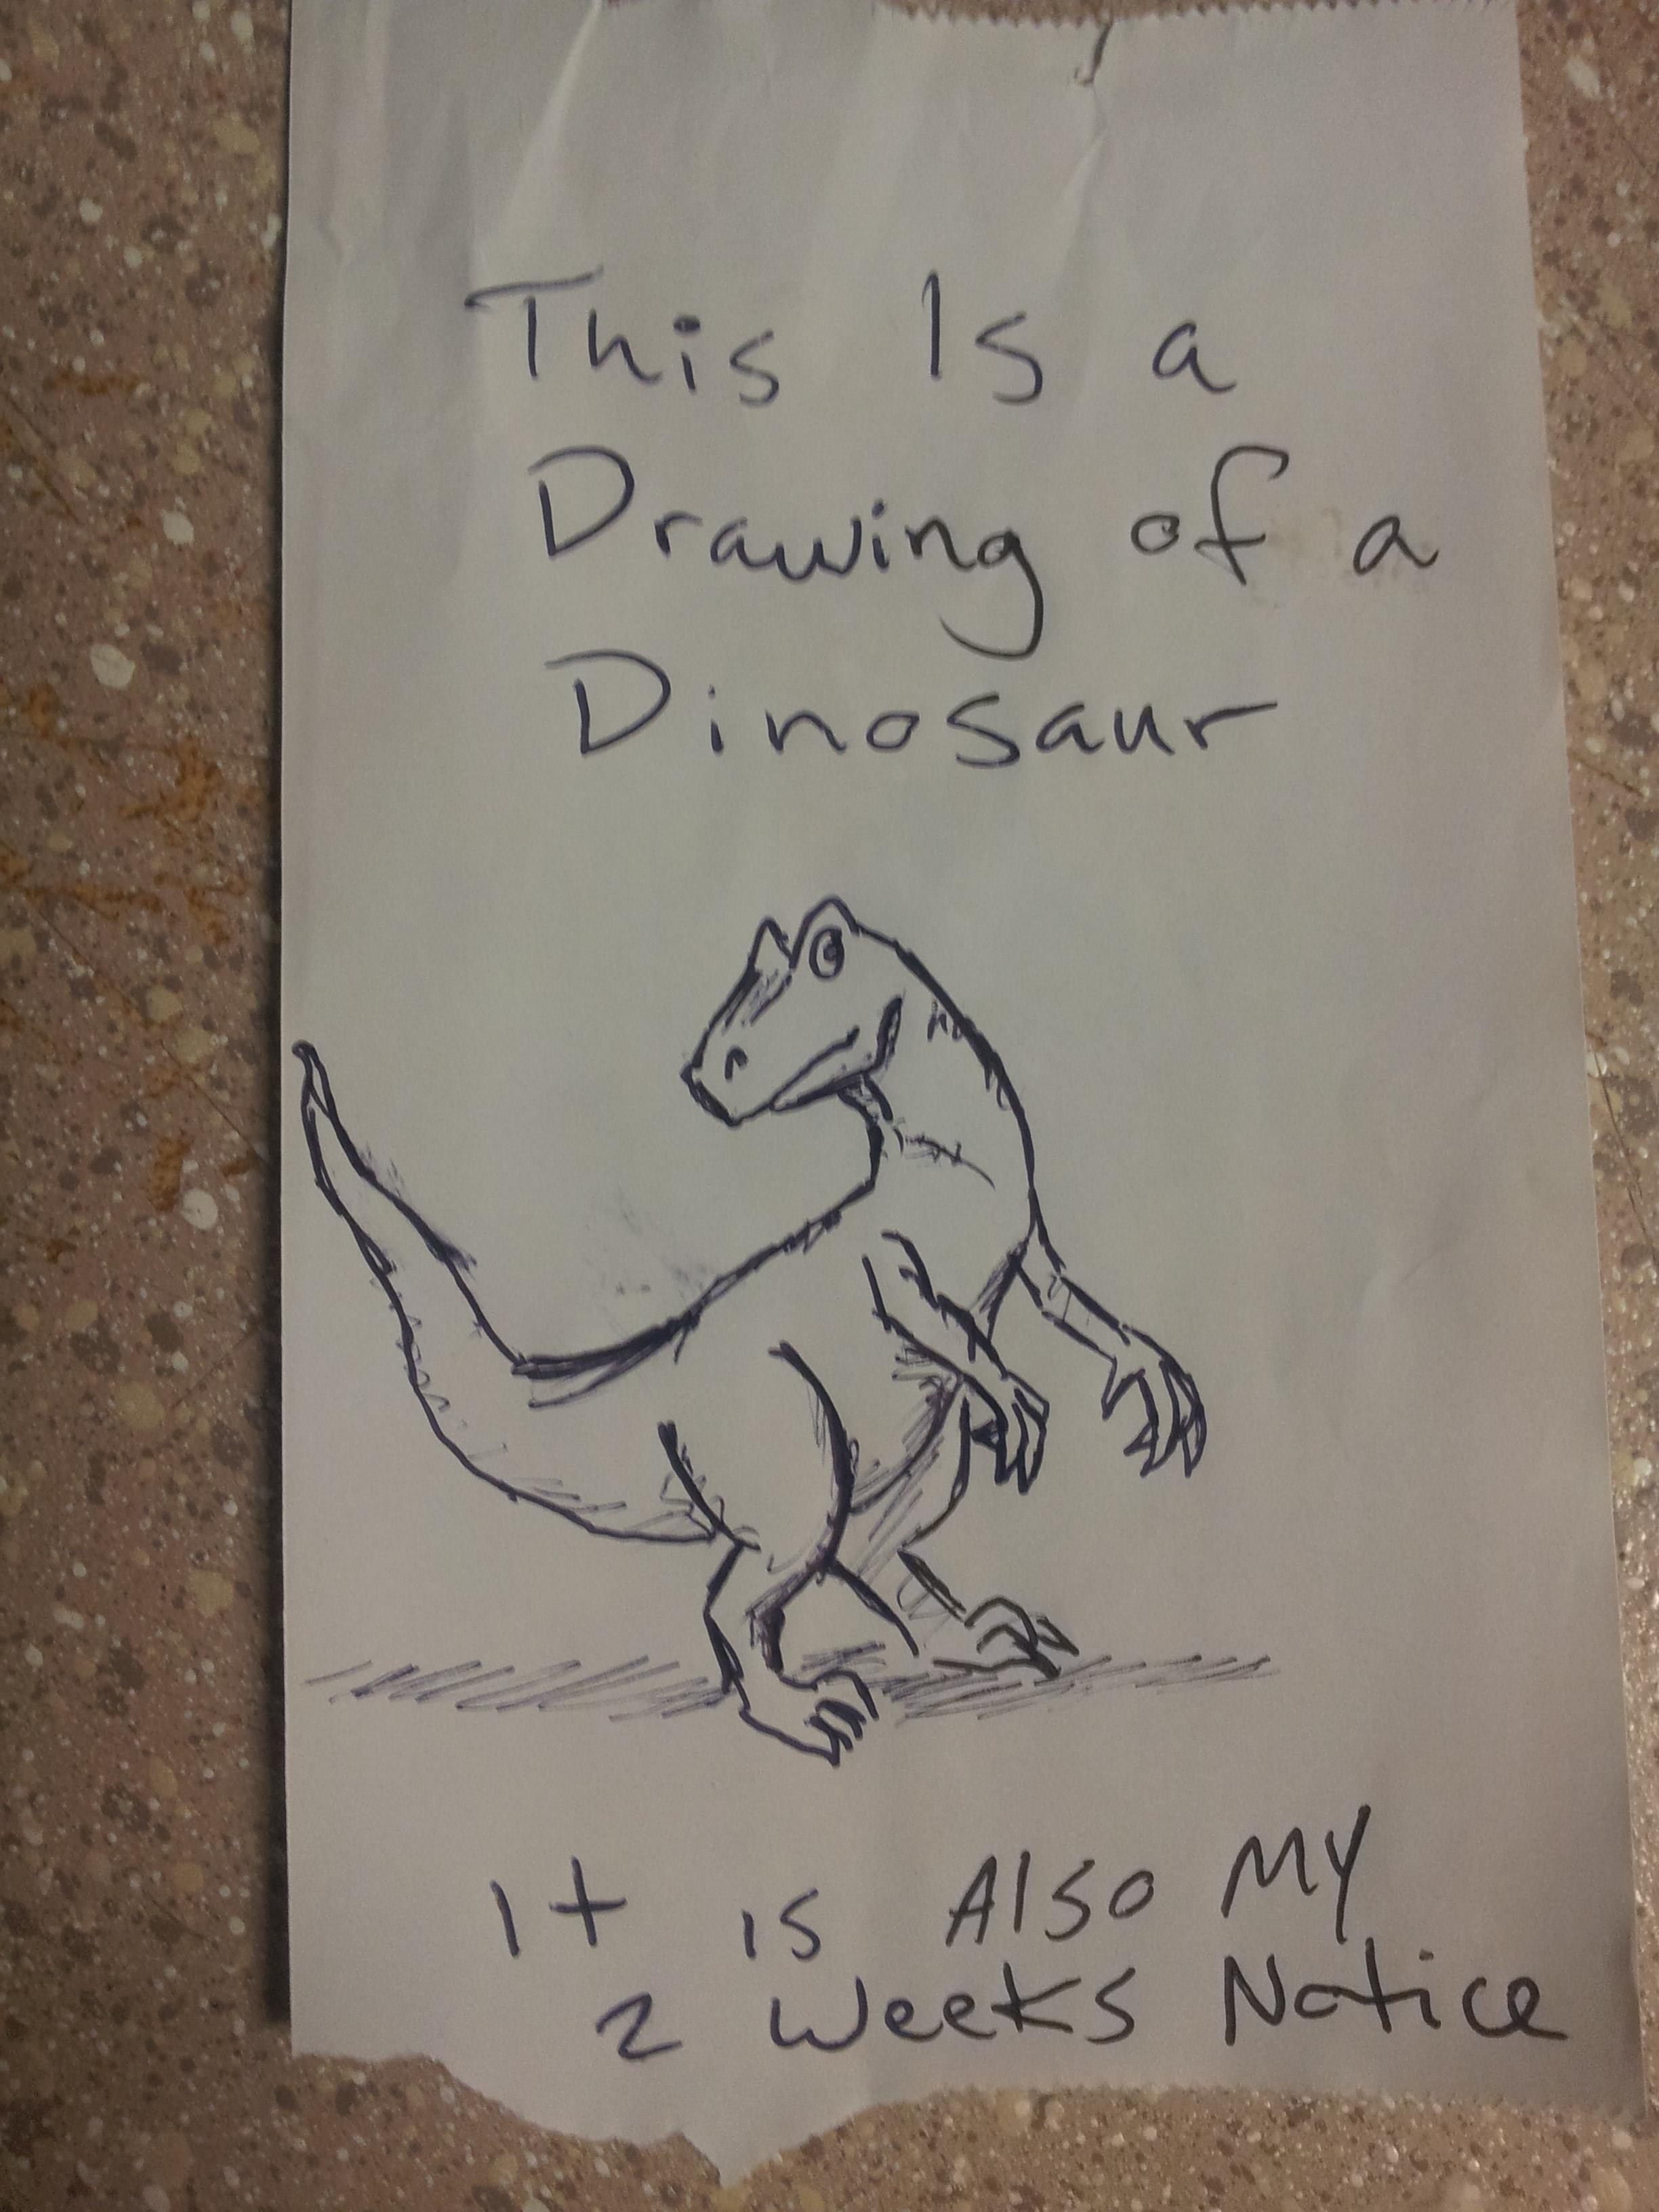 best way to quit a job - This is a Drawing of a Dinosaur a It is also my 2 weeks Notice